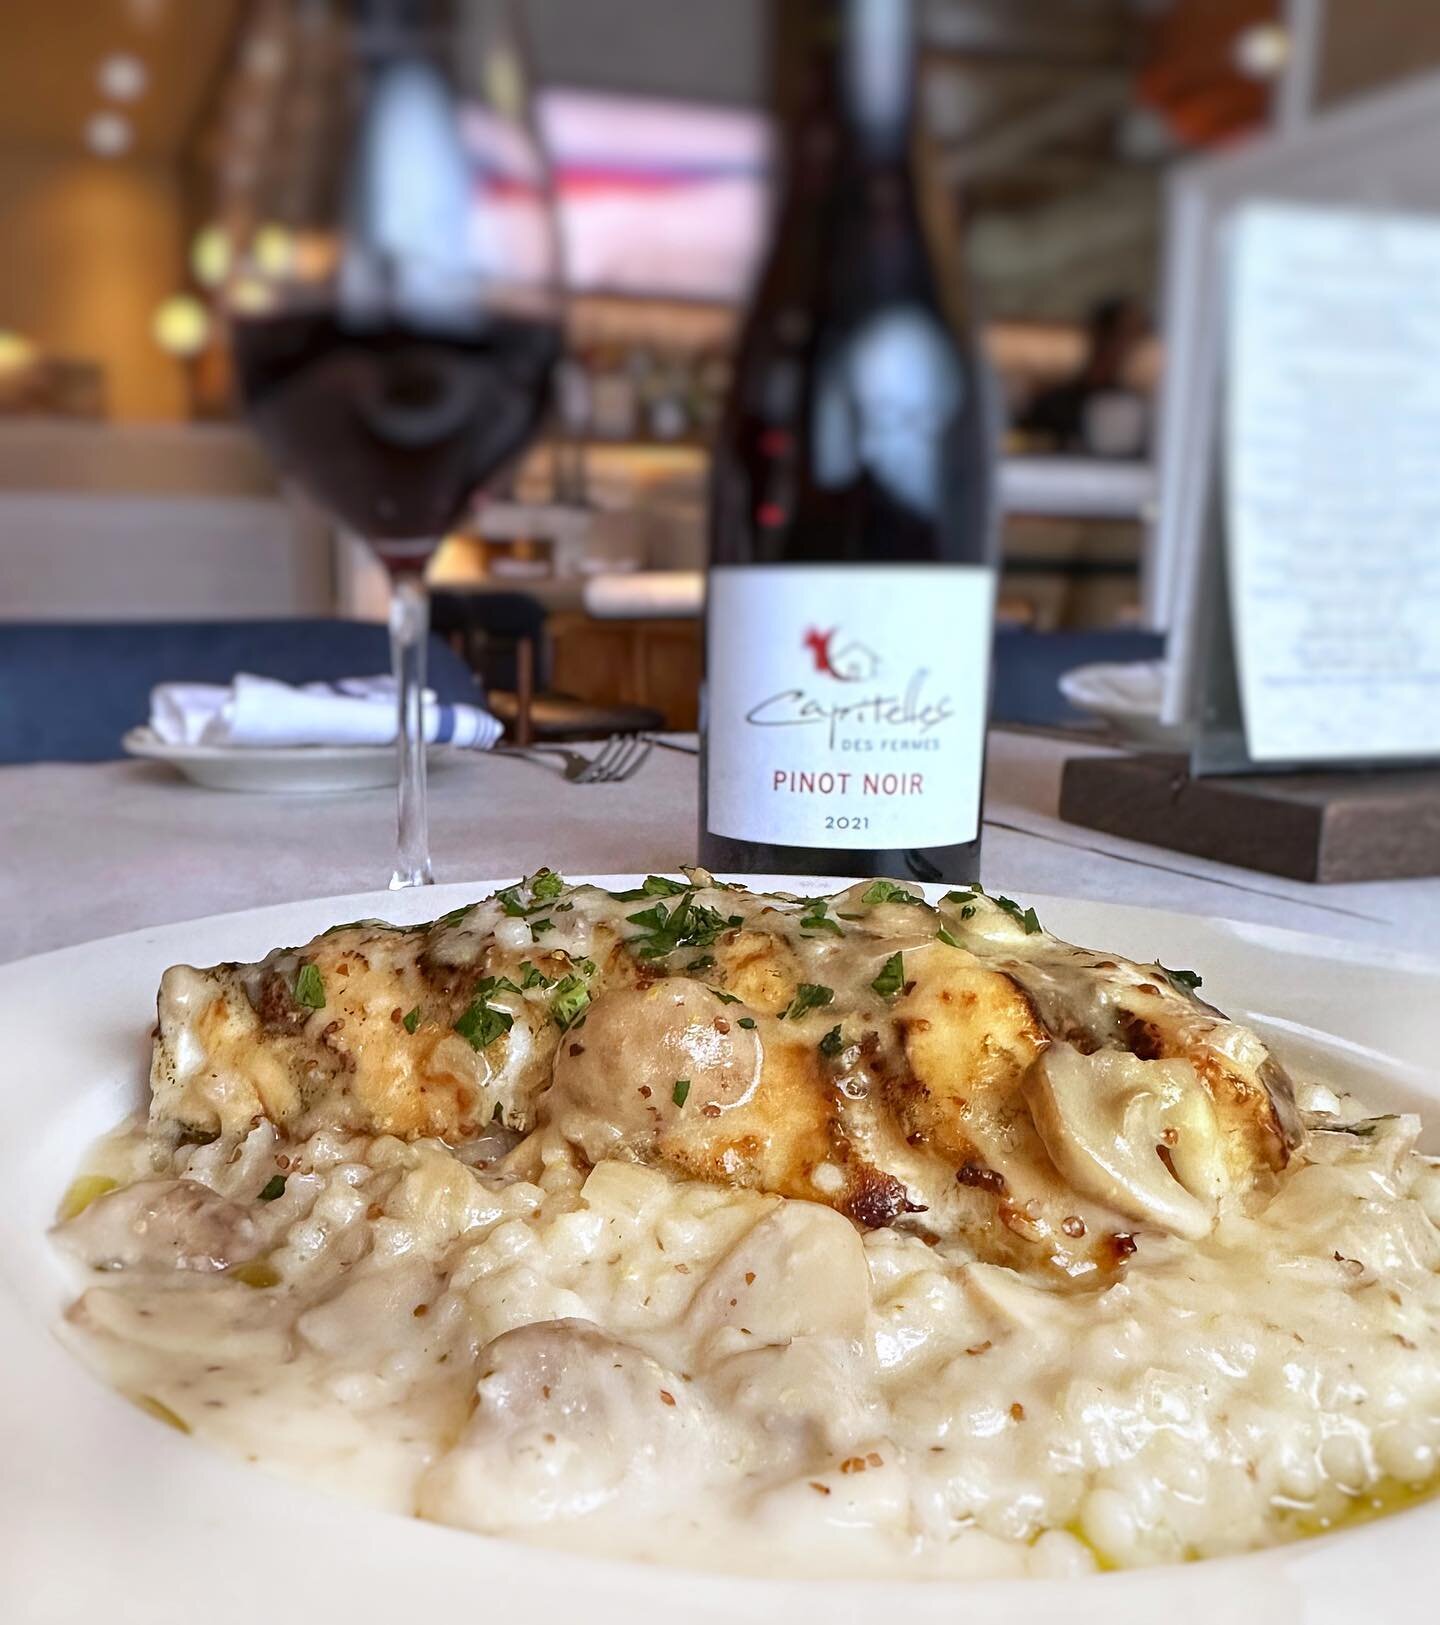 Wild Nova Scotia Halibut with pearled couscous and mushroom cream sauce. This mild fish pairs beautifully with the Capitelles des Fermes Pinot Noir - with a hint of spice and ripe cherry, this wine plays beautifully with both the fish and mushroom cr